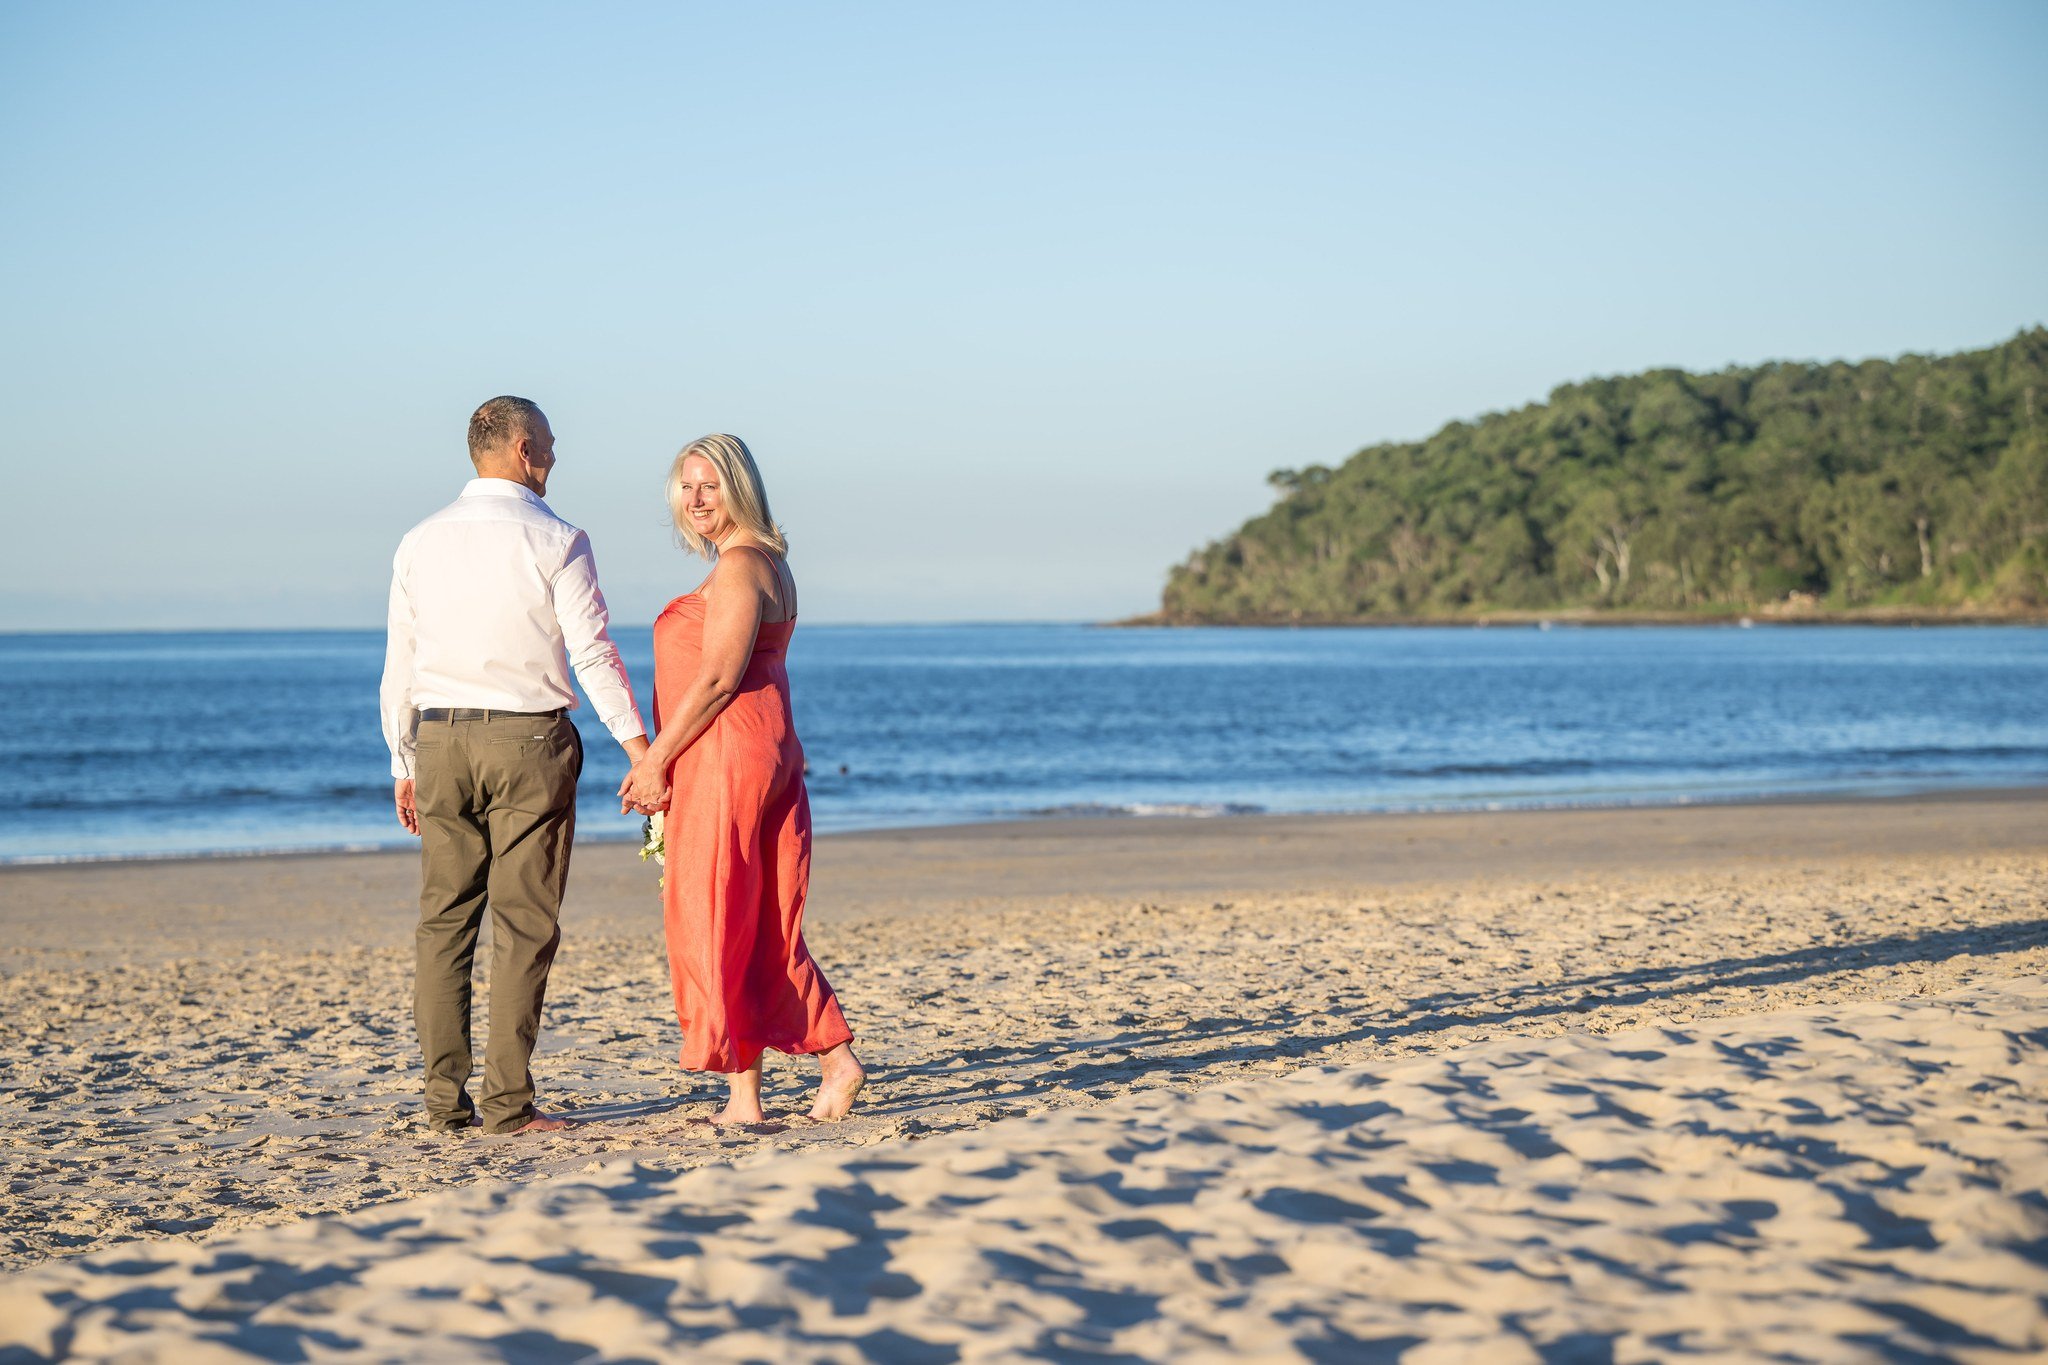 Carmen and Grant's spontaneous holiday to Noosa turned into a beautiful elopement. 

They skipped the stress of a big wedding and enjoyed a sunny, love-filled afternoon getting married on their beachside balcony overlooking Laguna Bay.

🤍 Wedding De